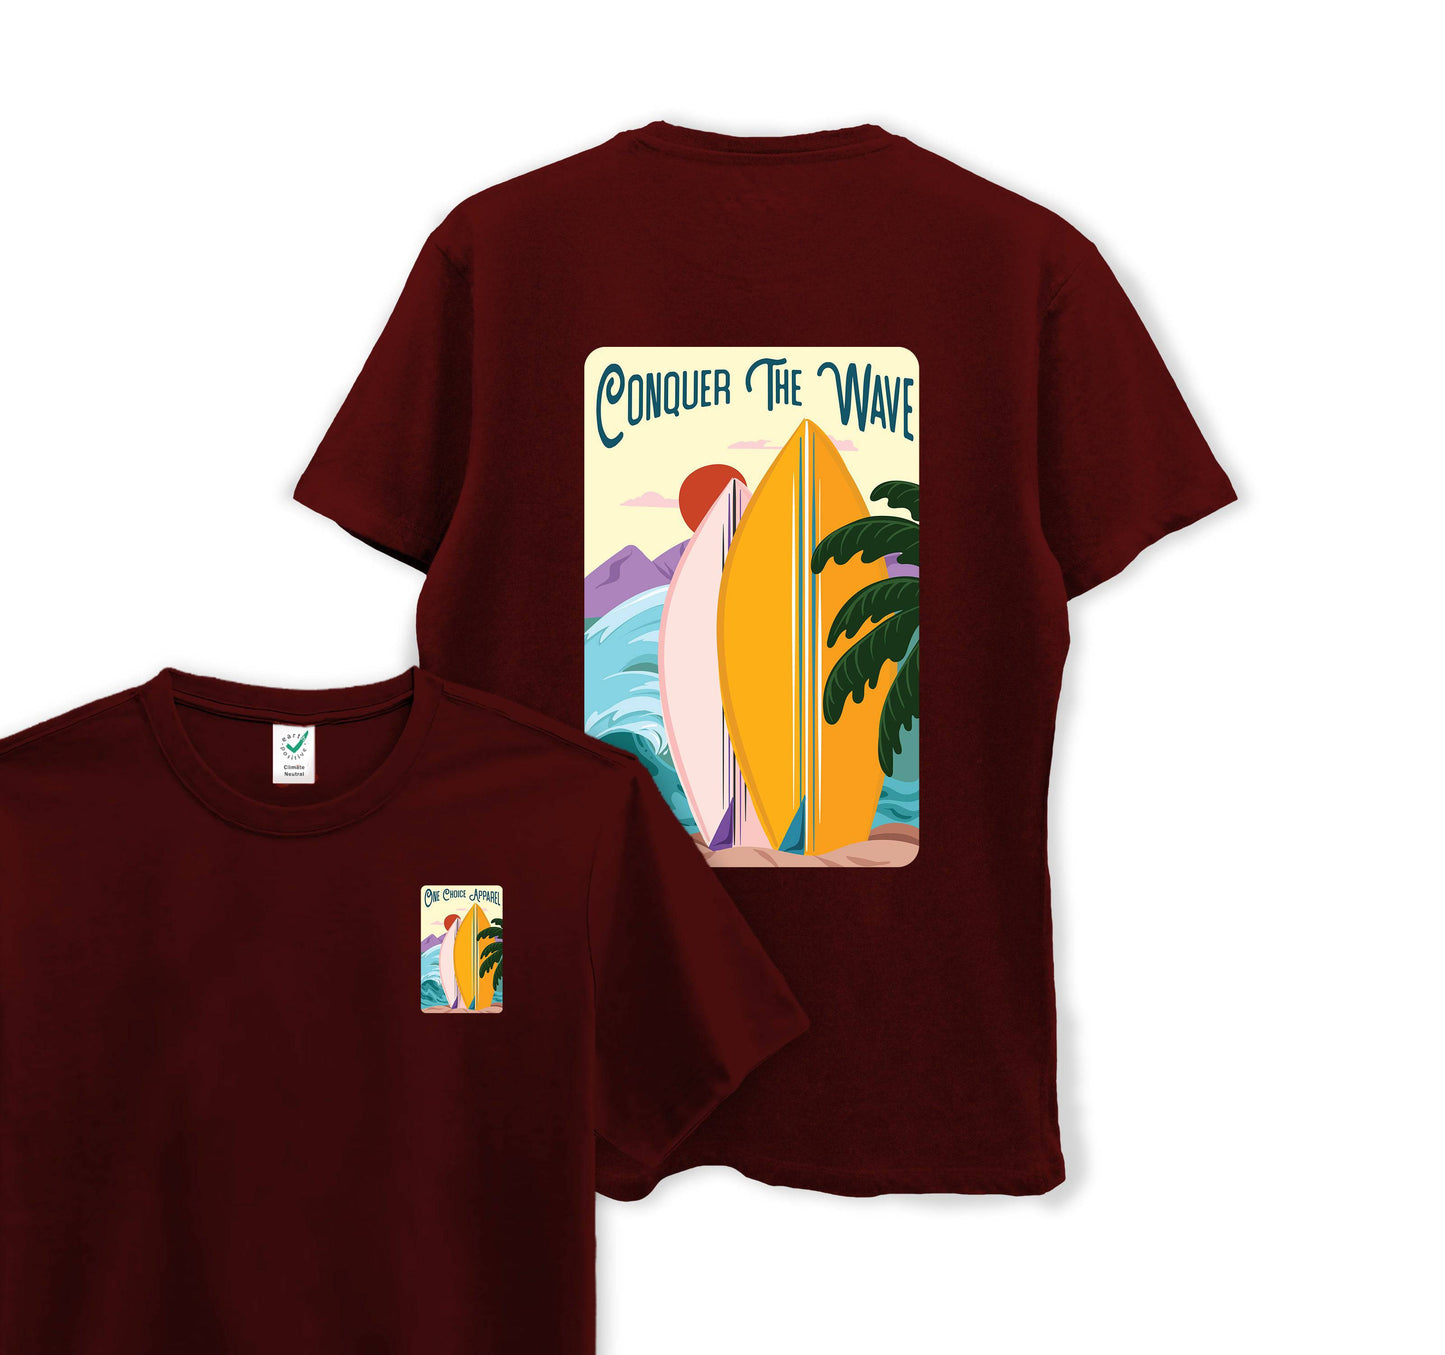 Conquer The Wave - Organic Cotton Tee - One Choice Apparel